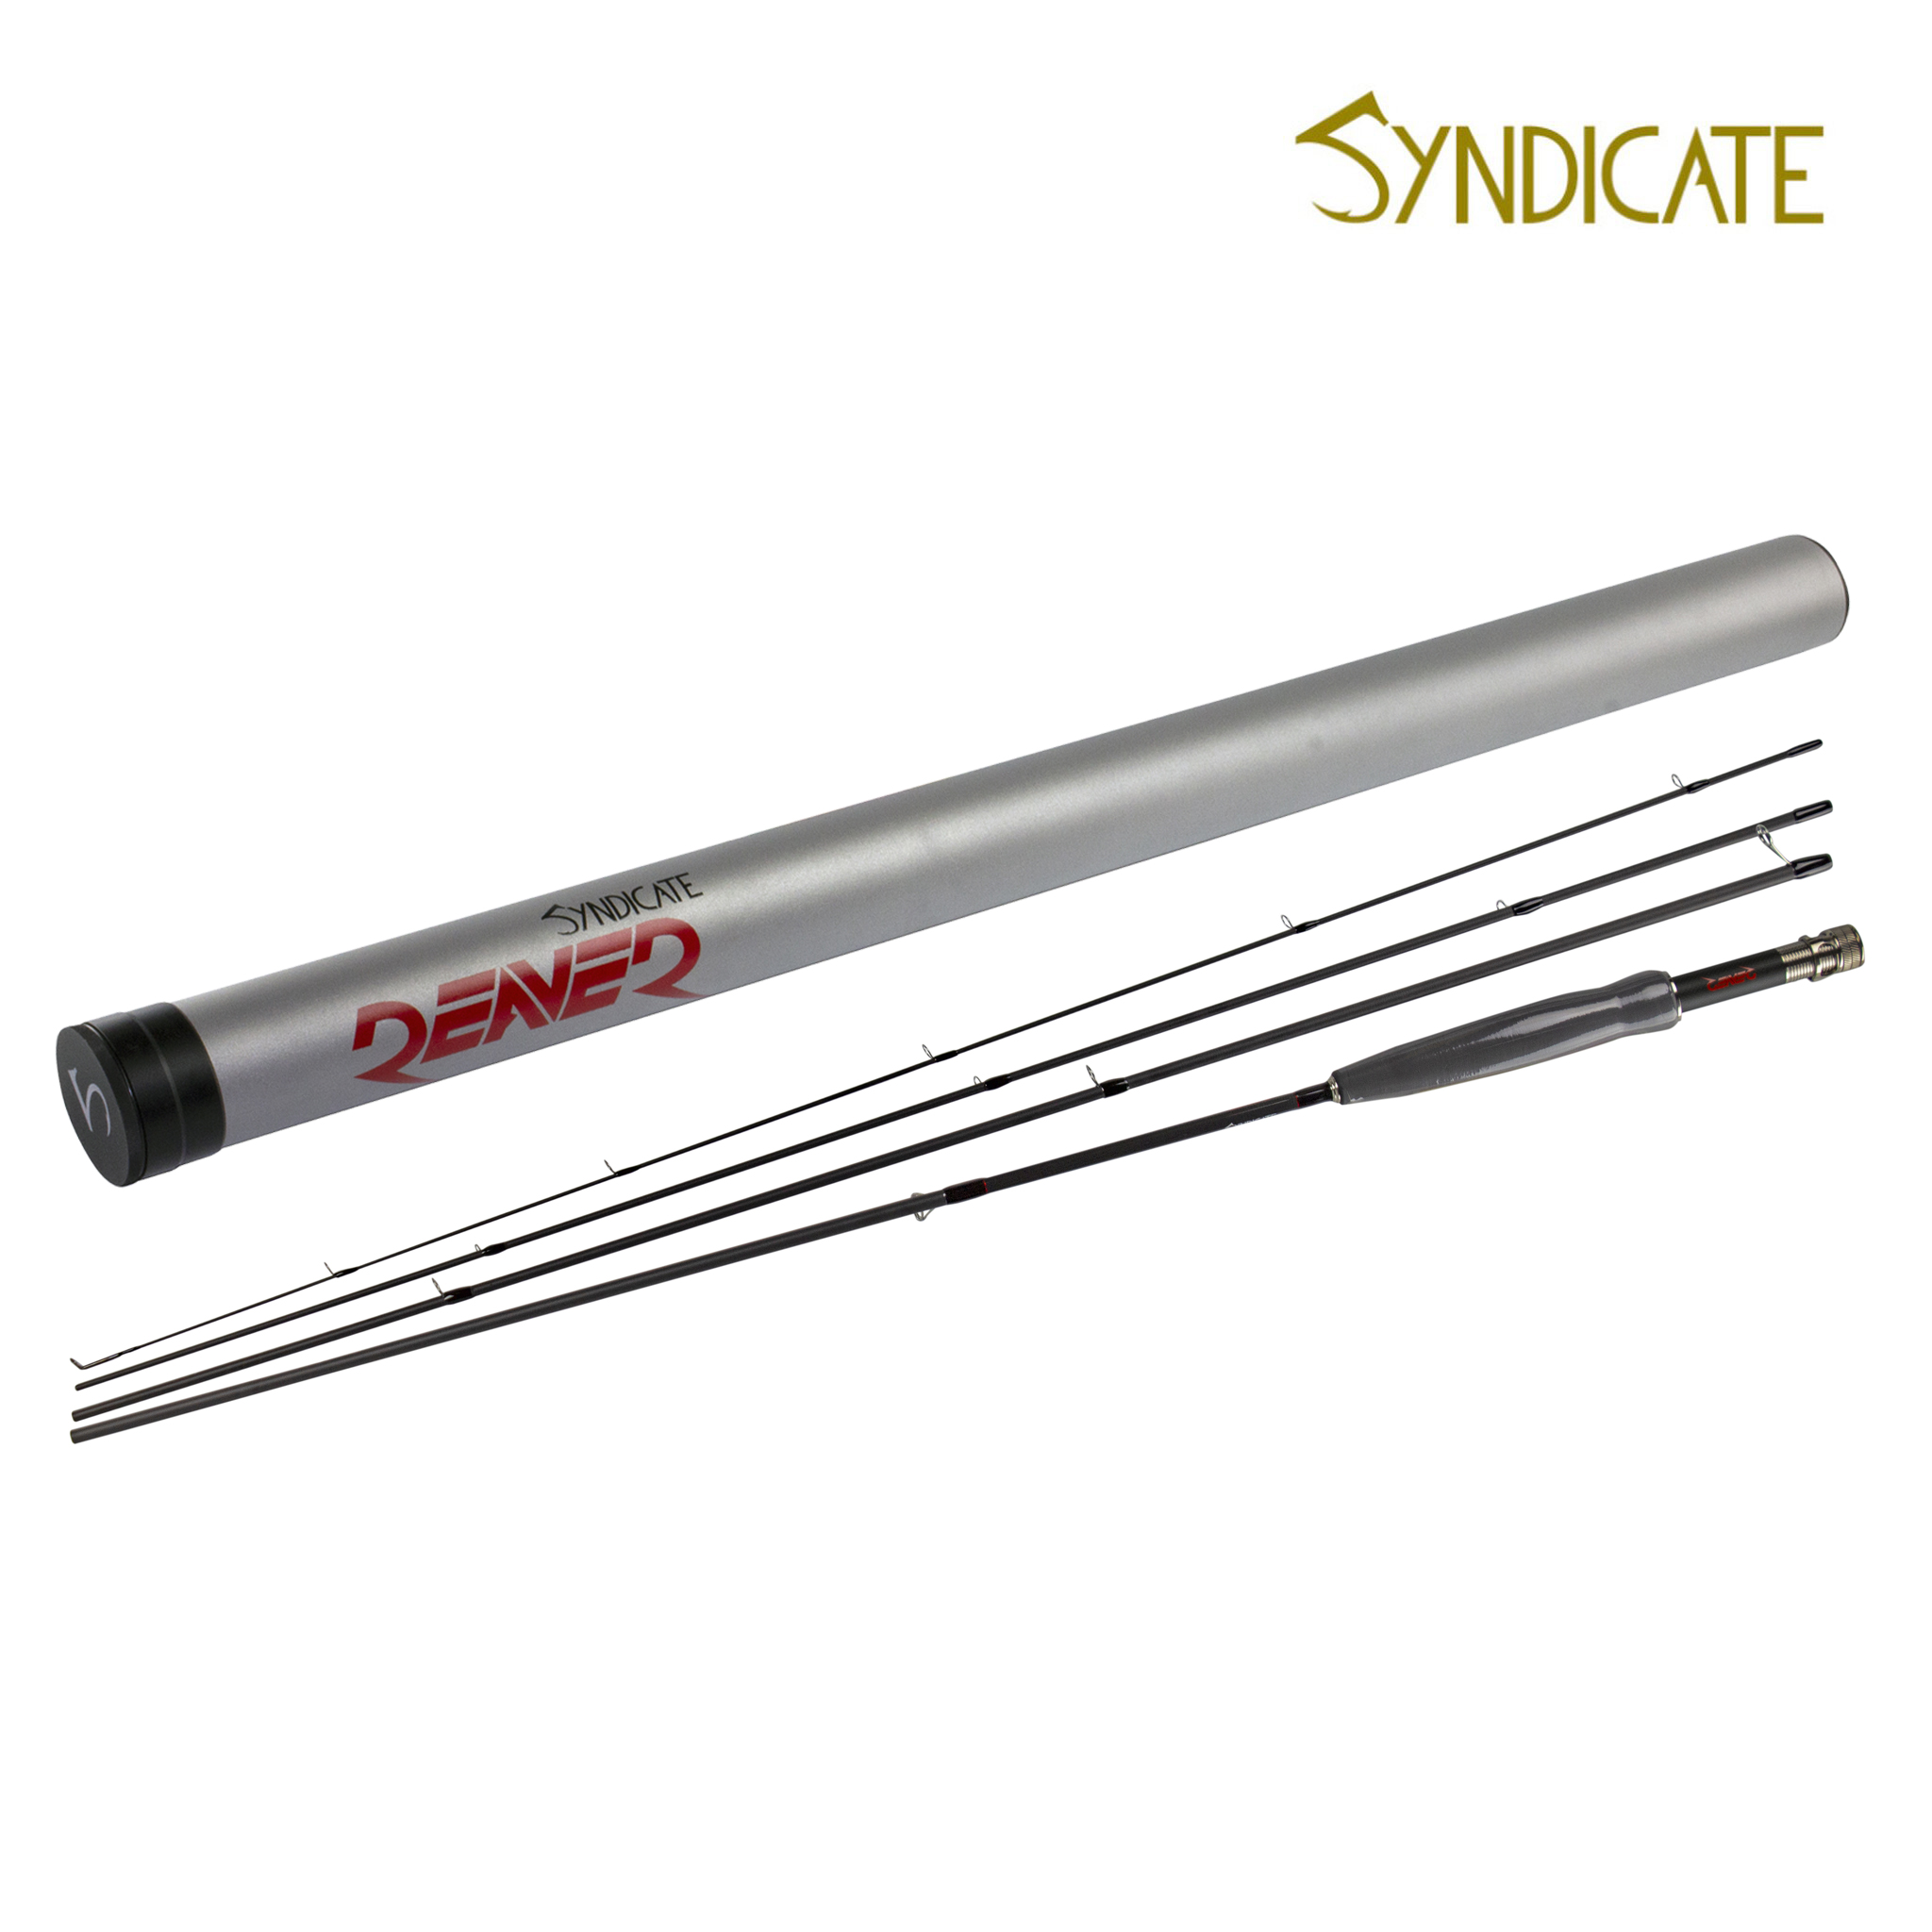 Syndicate REAVER Euro Nymph Fly Rods 10' - 2 and 3 Weight